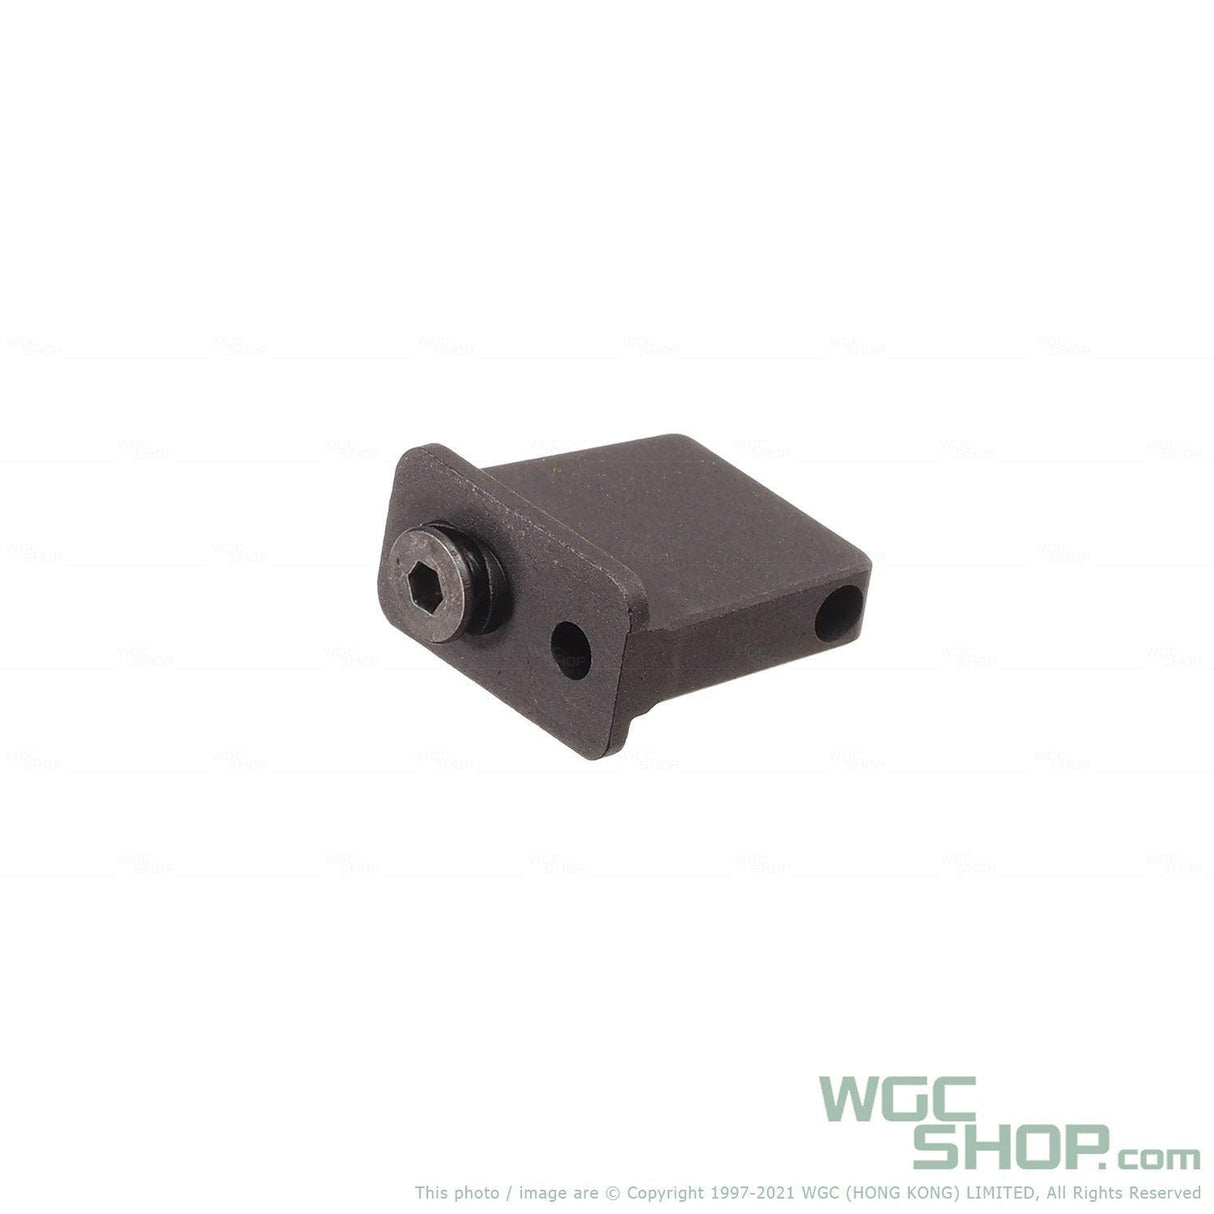 GUNDAY Tactical RMR Mount Base Kit for VFC Glock GBB Airsoft - WGC Shop